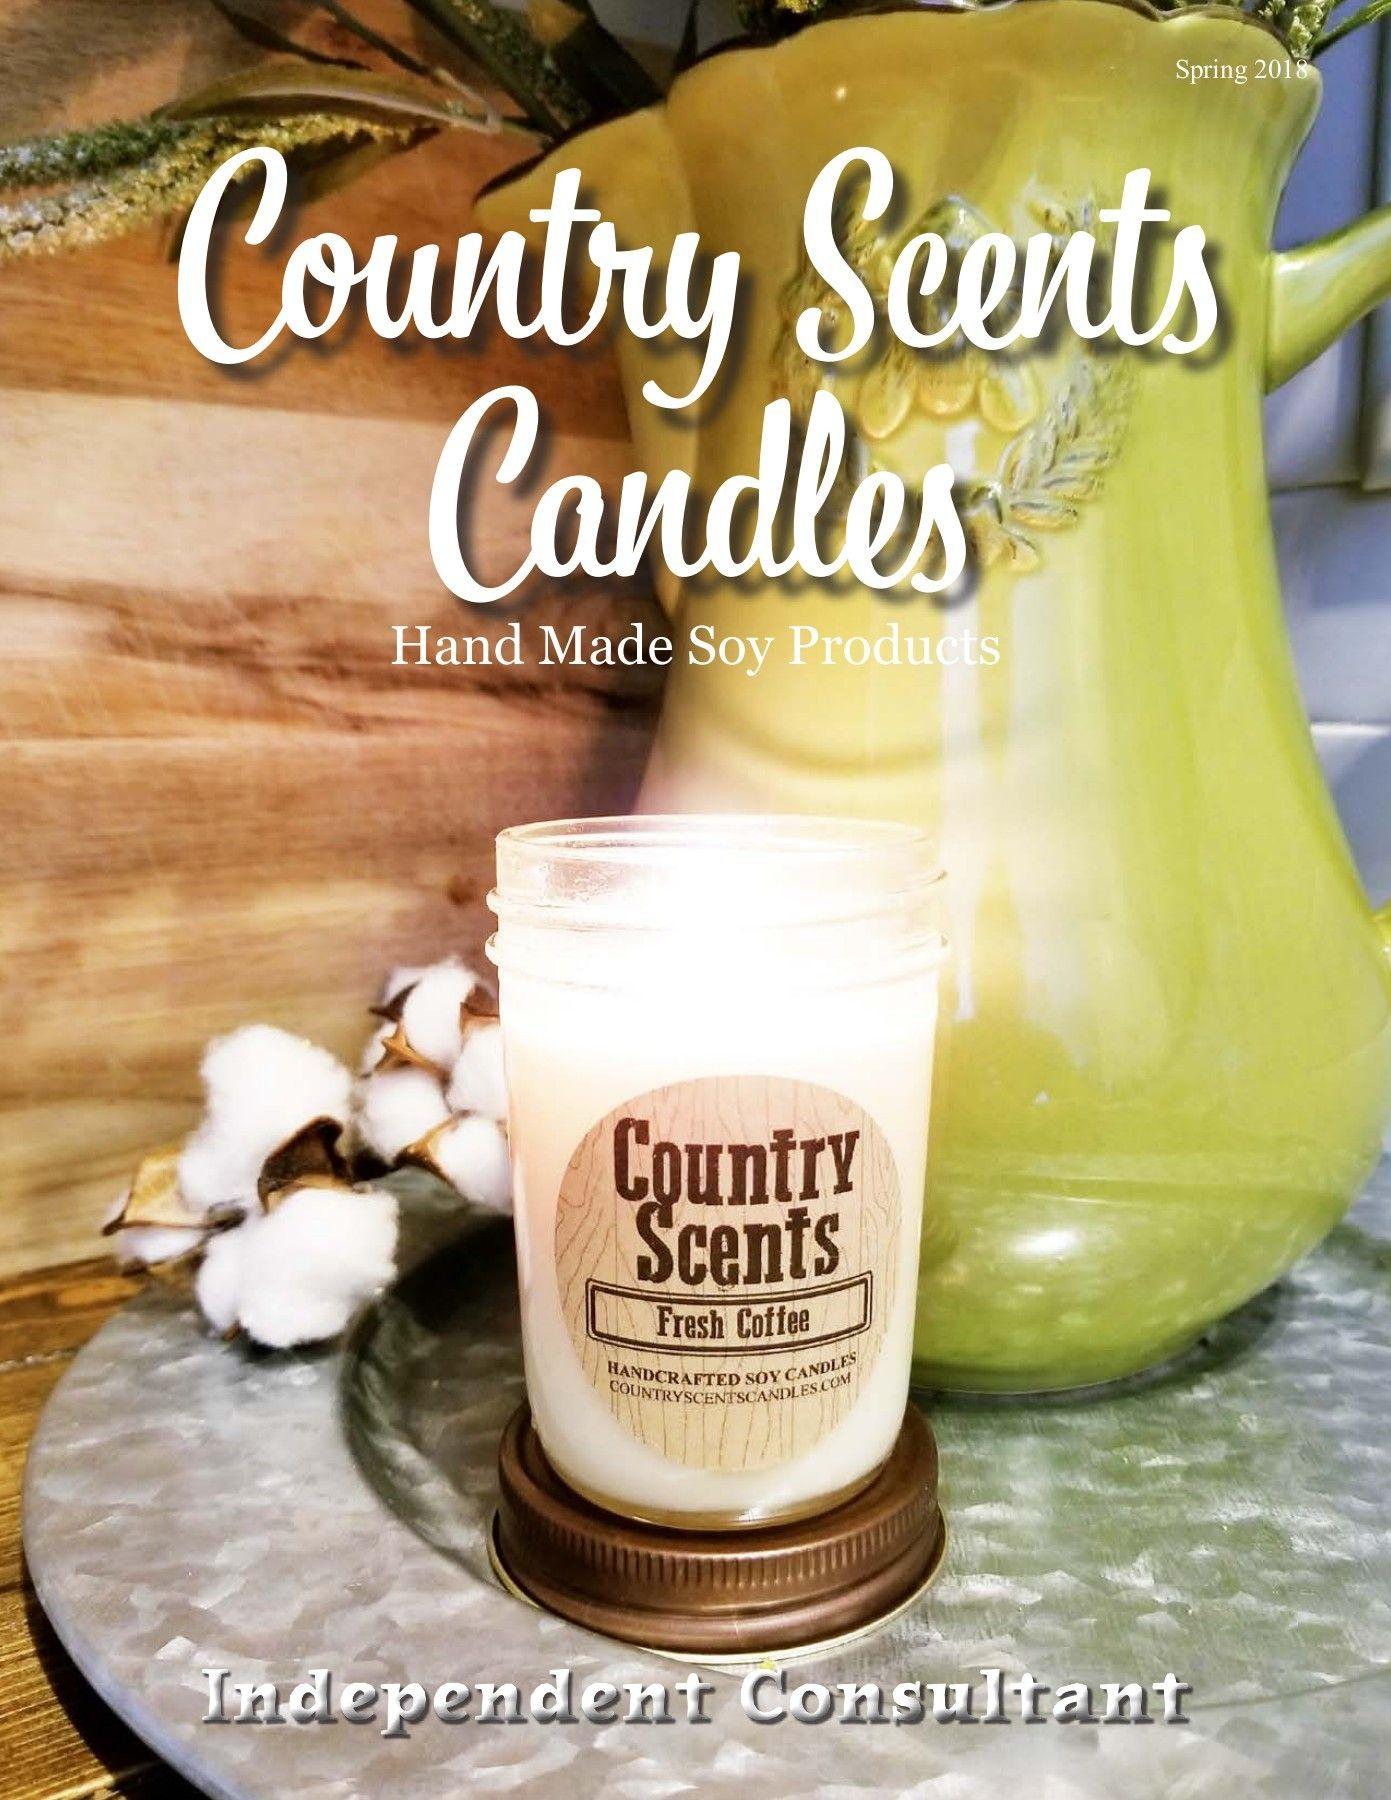 Country Scents Candles Logo - Country Scents Candles Spring 2018 Catalog Pages 1 - 40 - Text ...